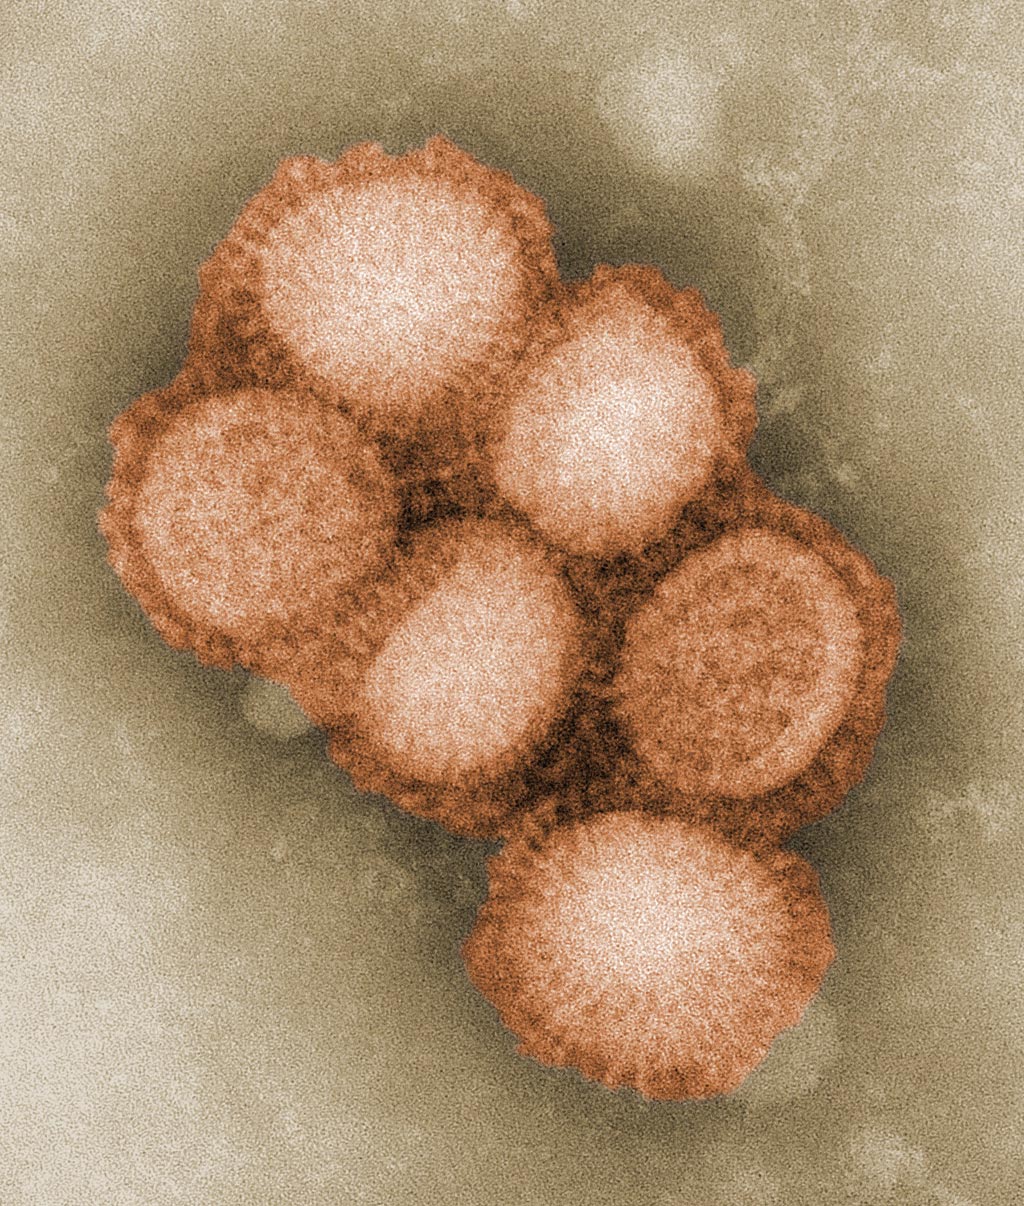 Image: A colorized negative stained transmission electron micrograph (TEM) depicting flu virus ultrastructural morphology (Photo courtesy of the CDC).